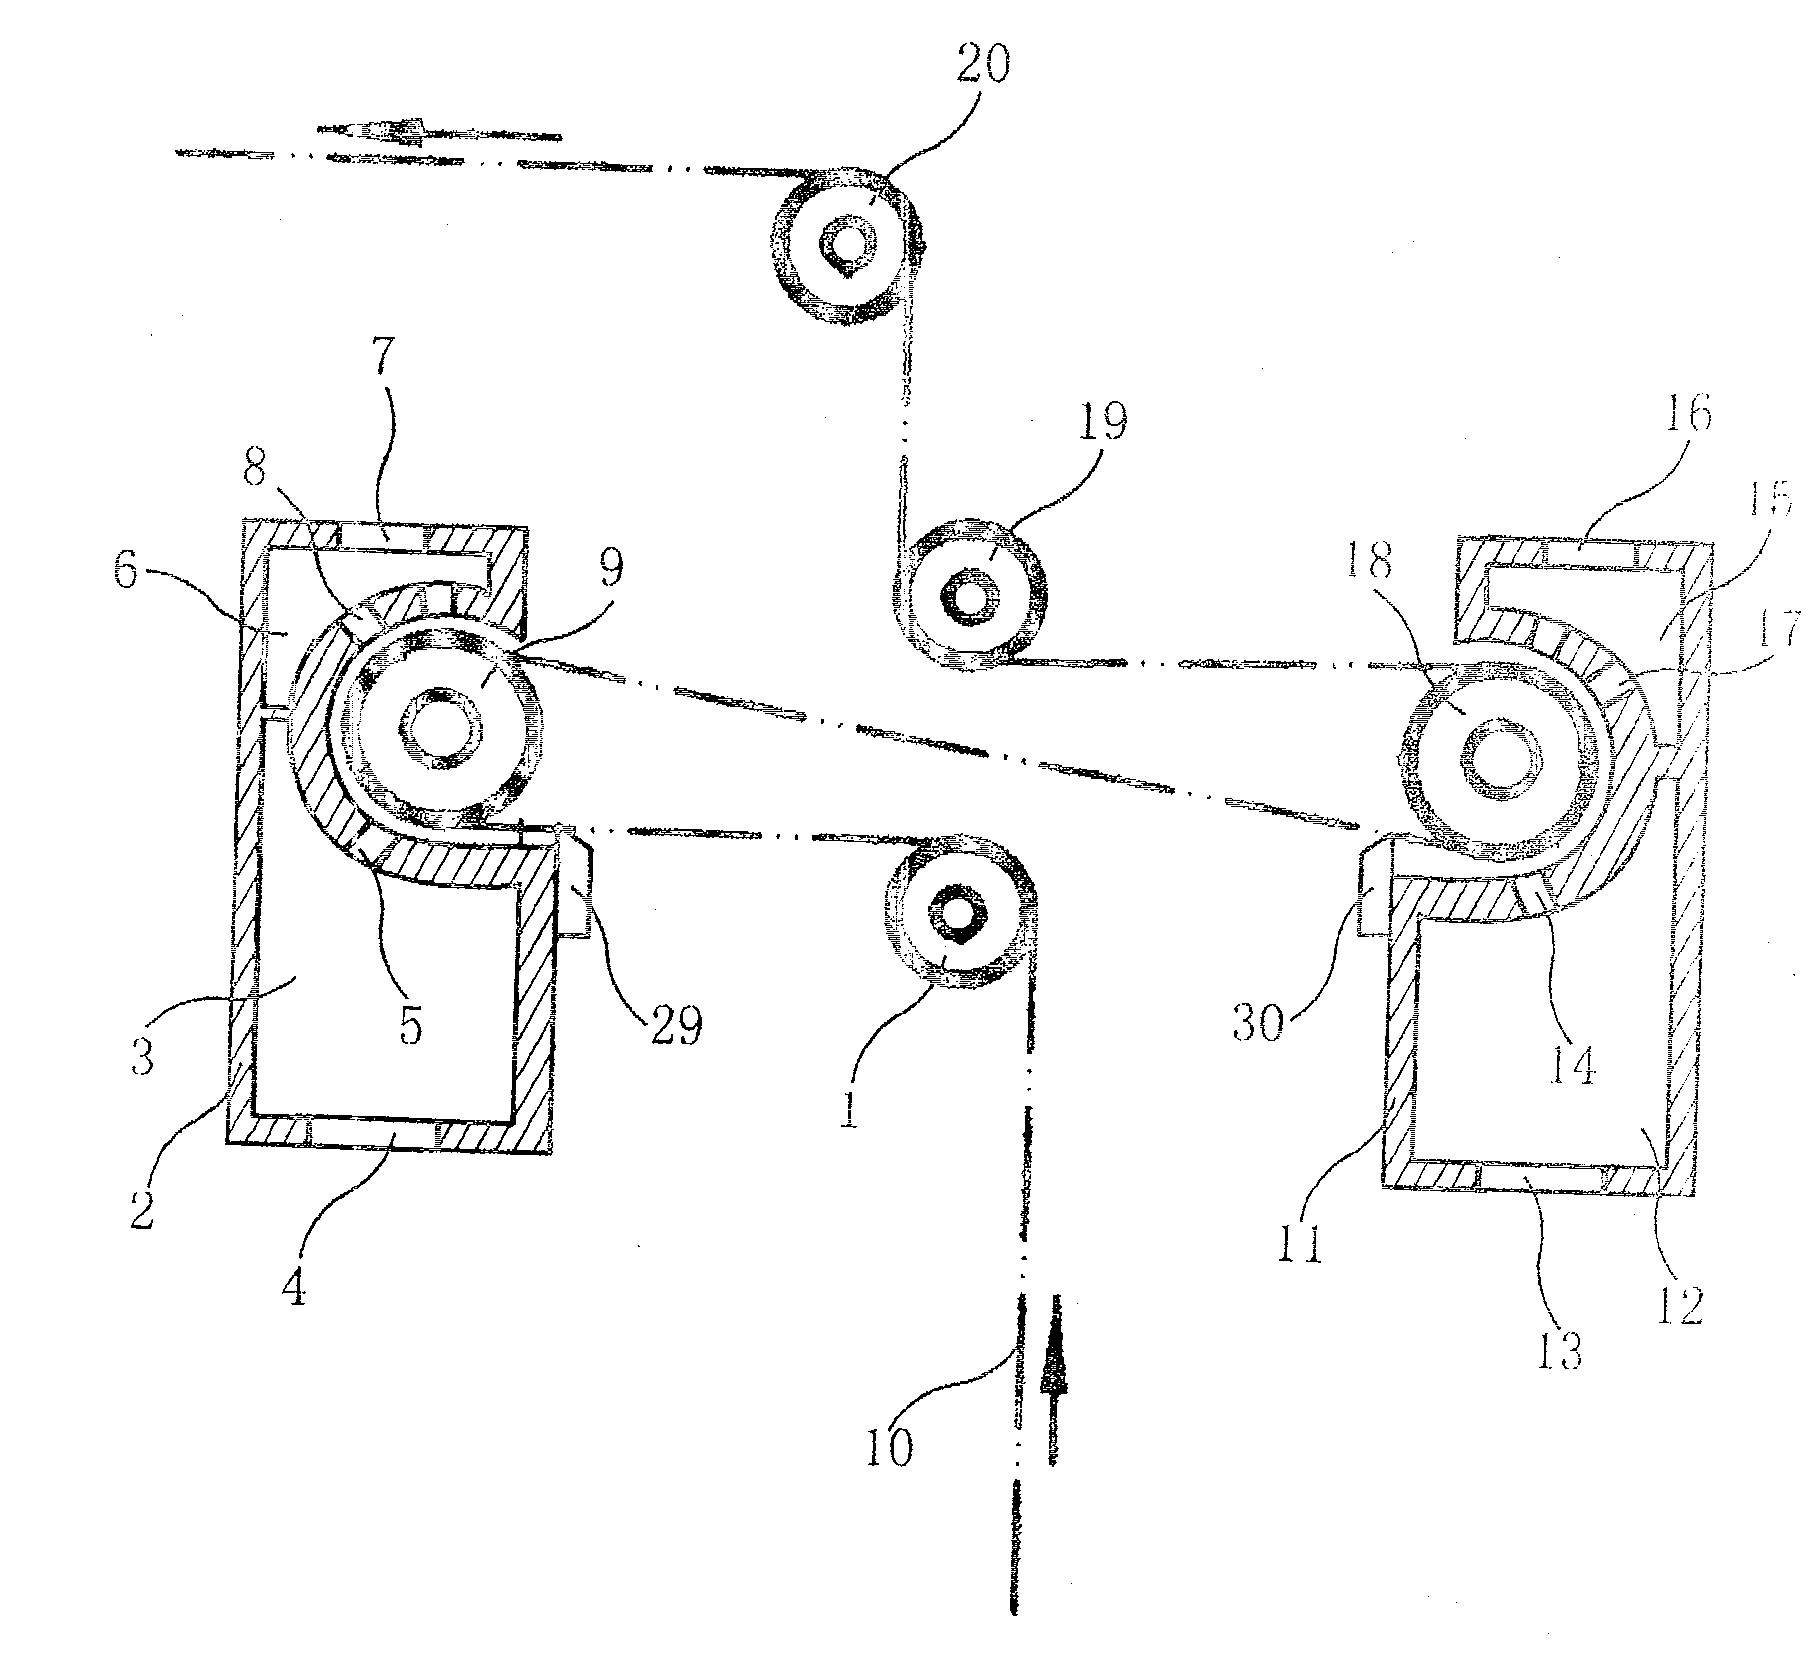 Method and equipment for cleaning photographic film